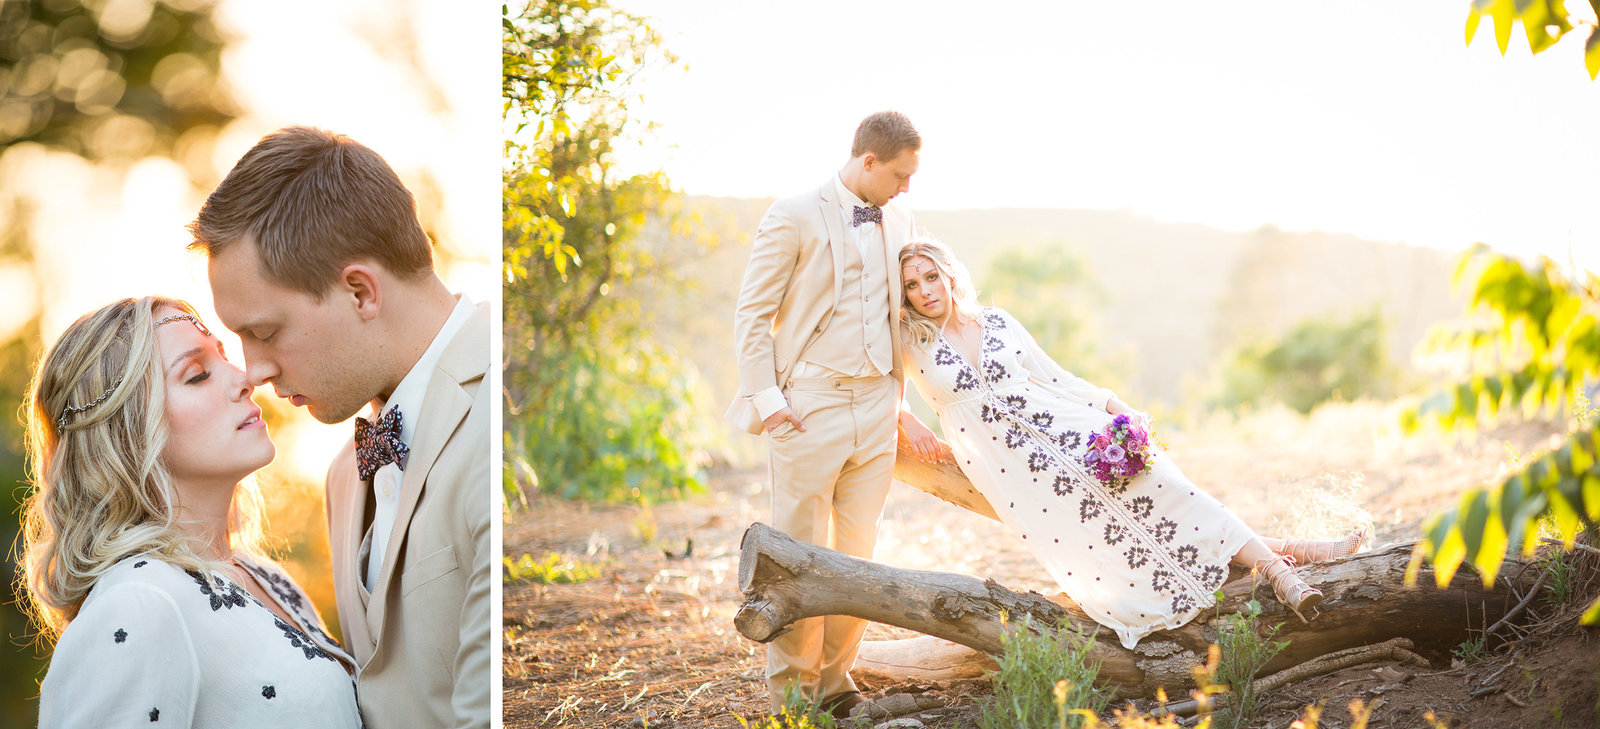 sunset lighting with bride and groom